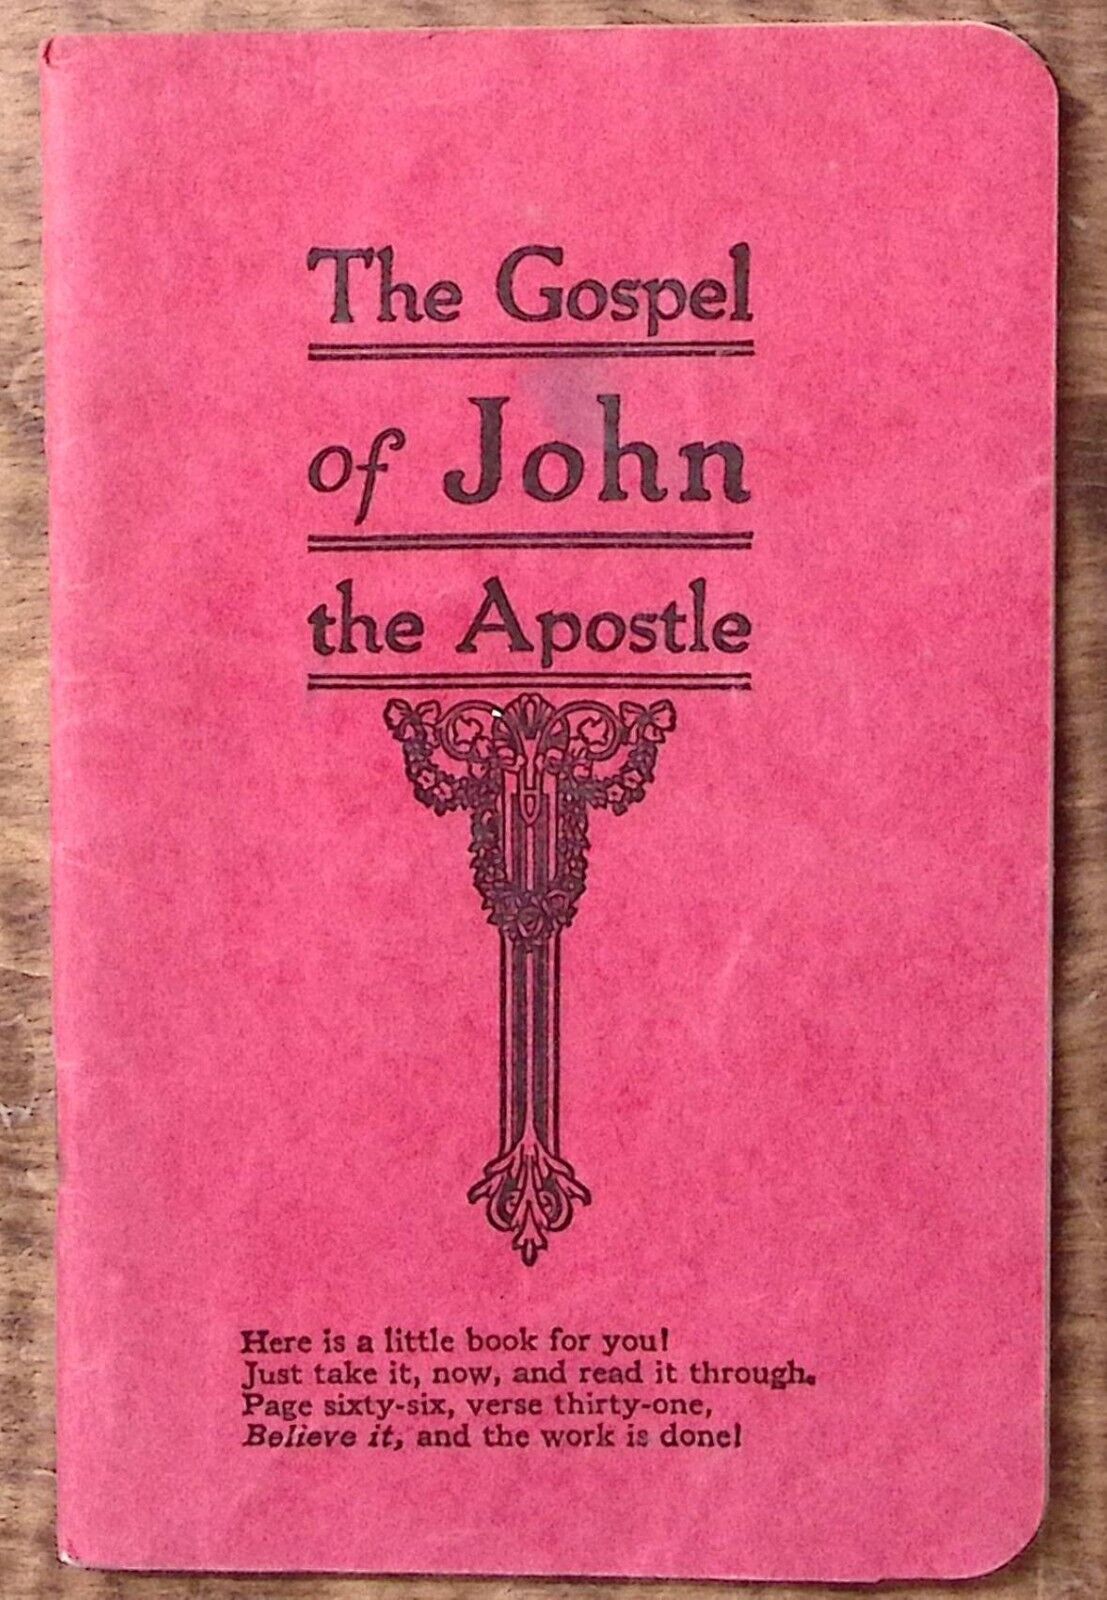 1950 THE GOSPEL OF JOHN THE APOSTLE MOODY INSTITUTE BIBLE STUDY BOOKLET Z5336